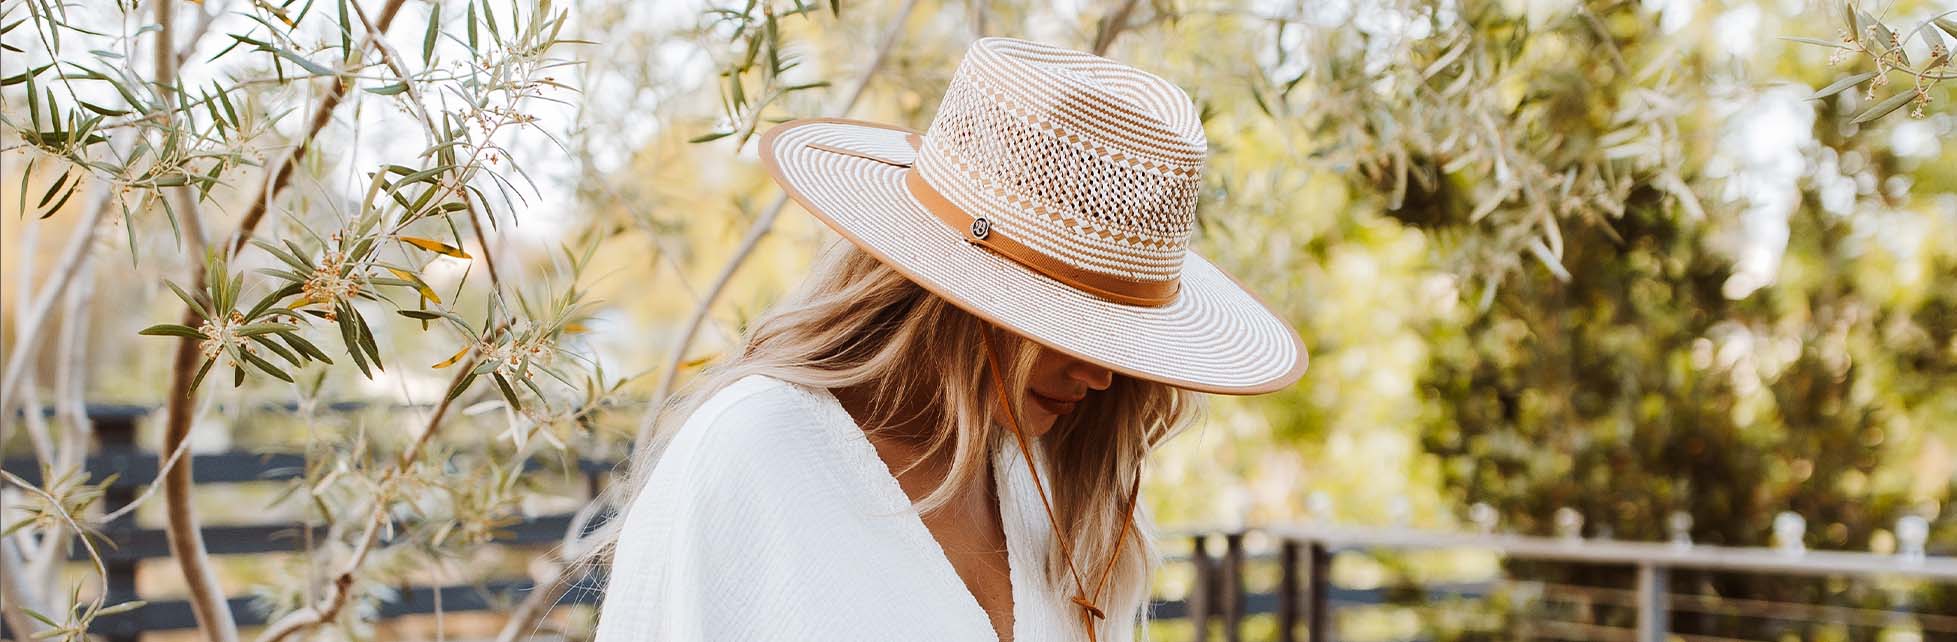 Biltmore Vintage Couture Straw Hats